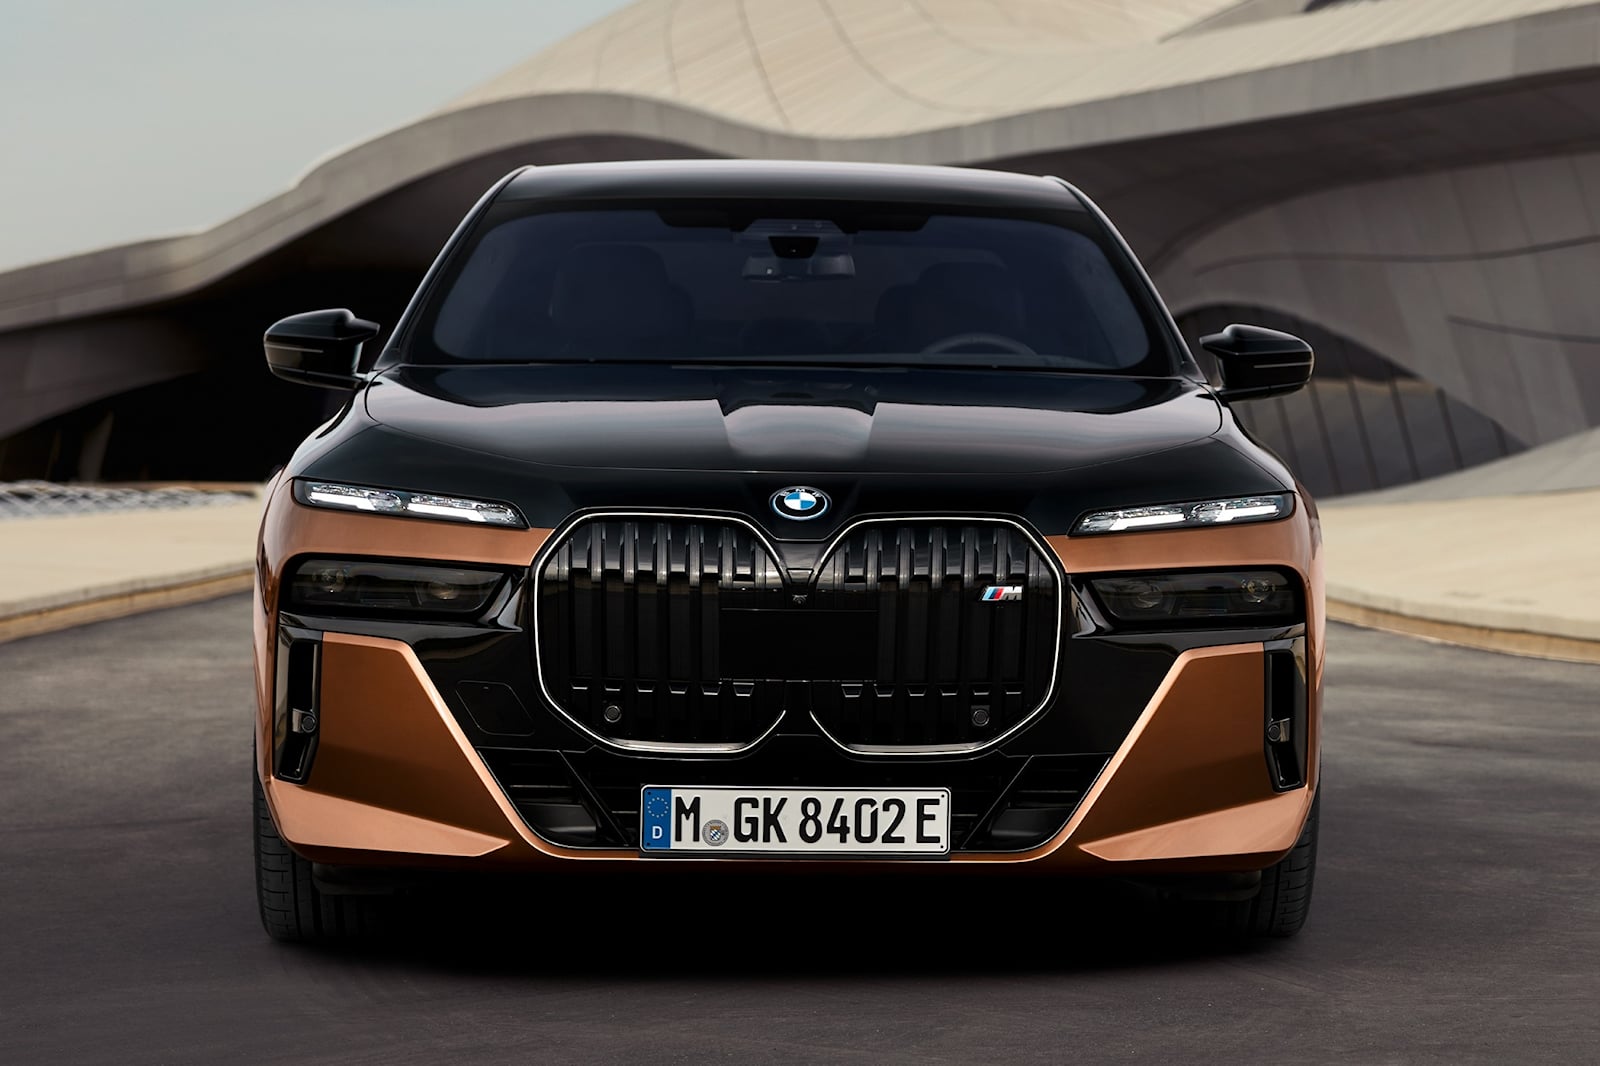 BMW i7's backseat makes the fully-electric worth the price